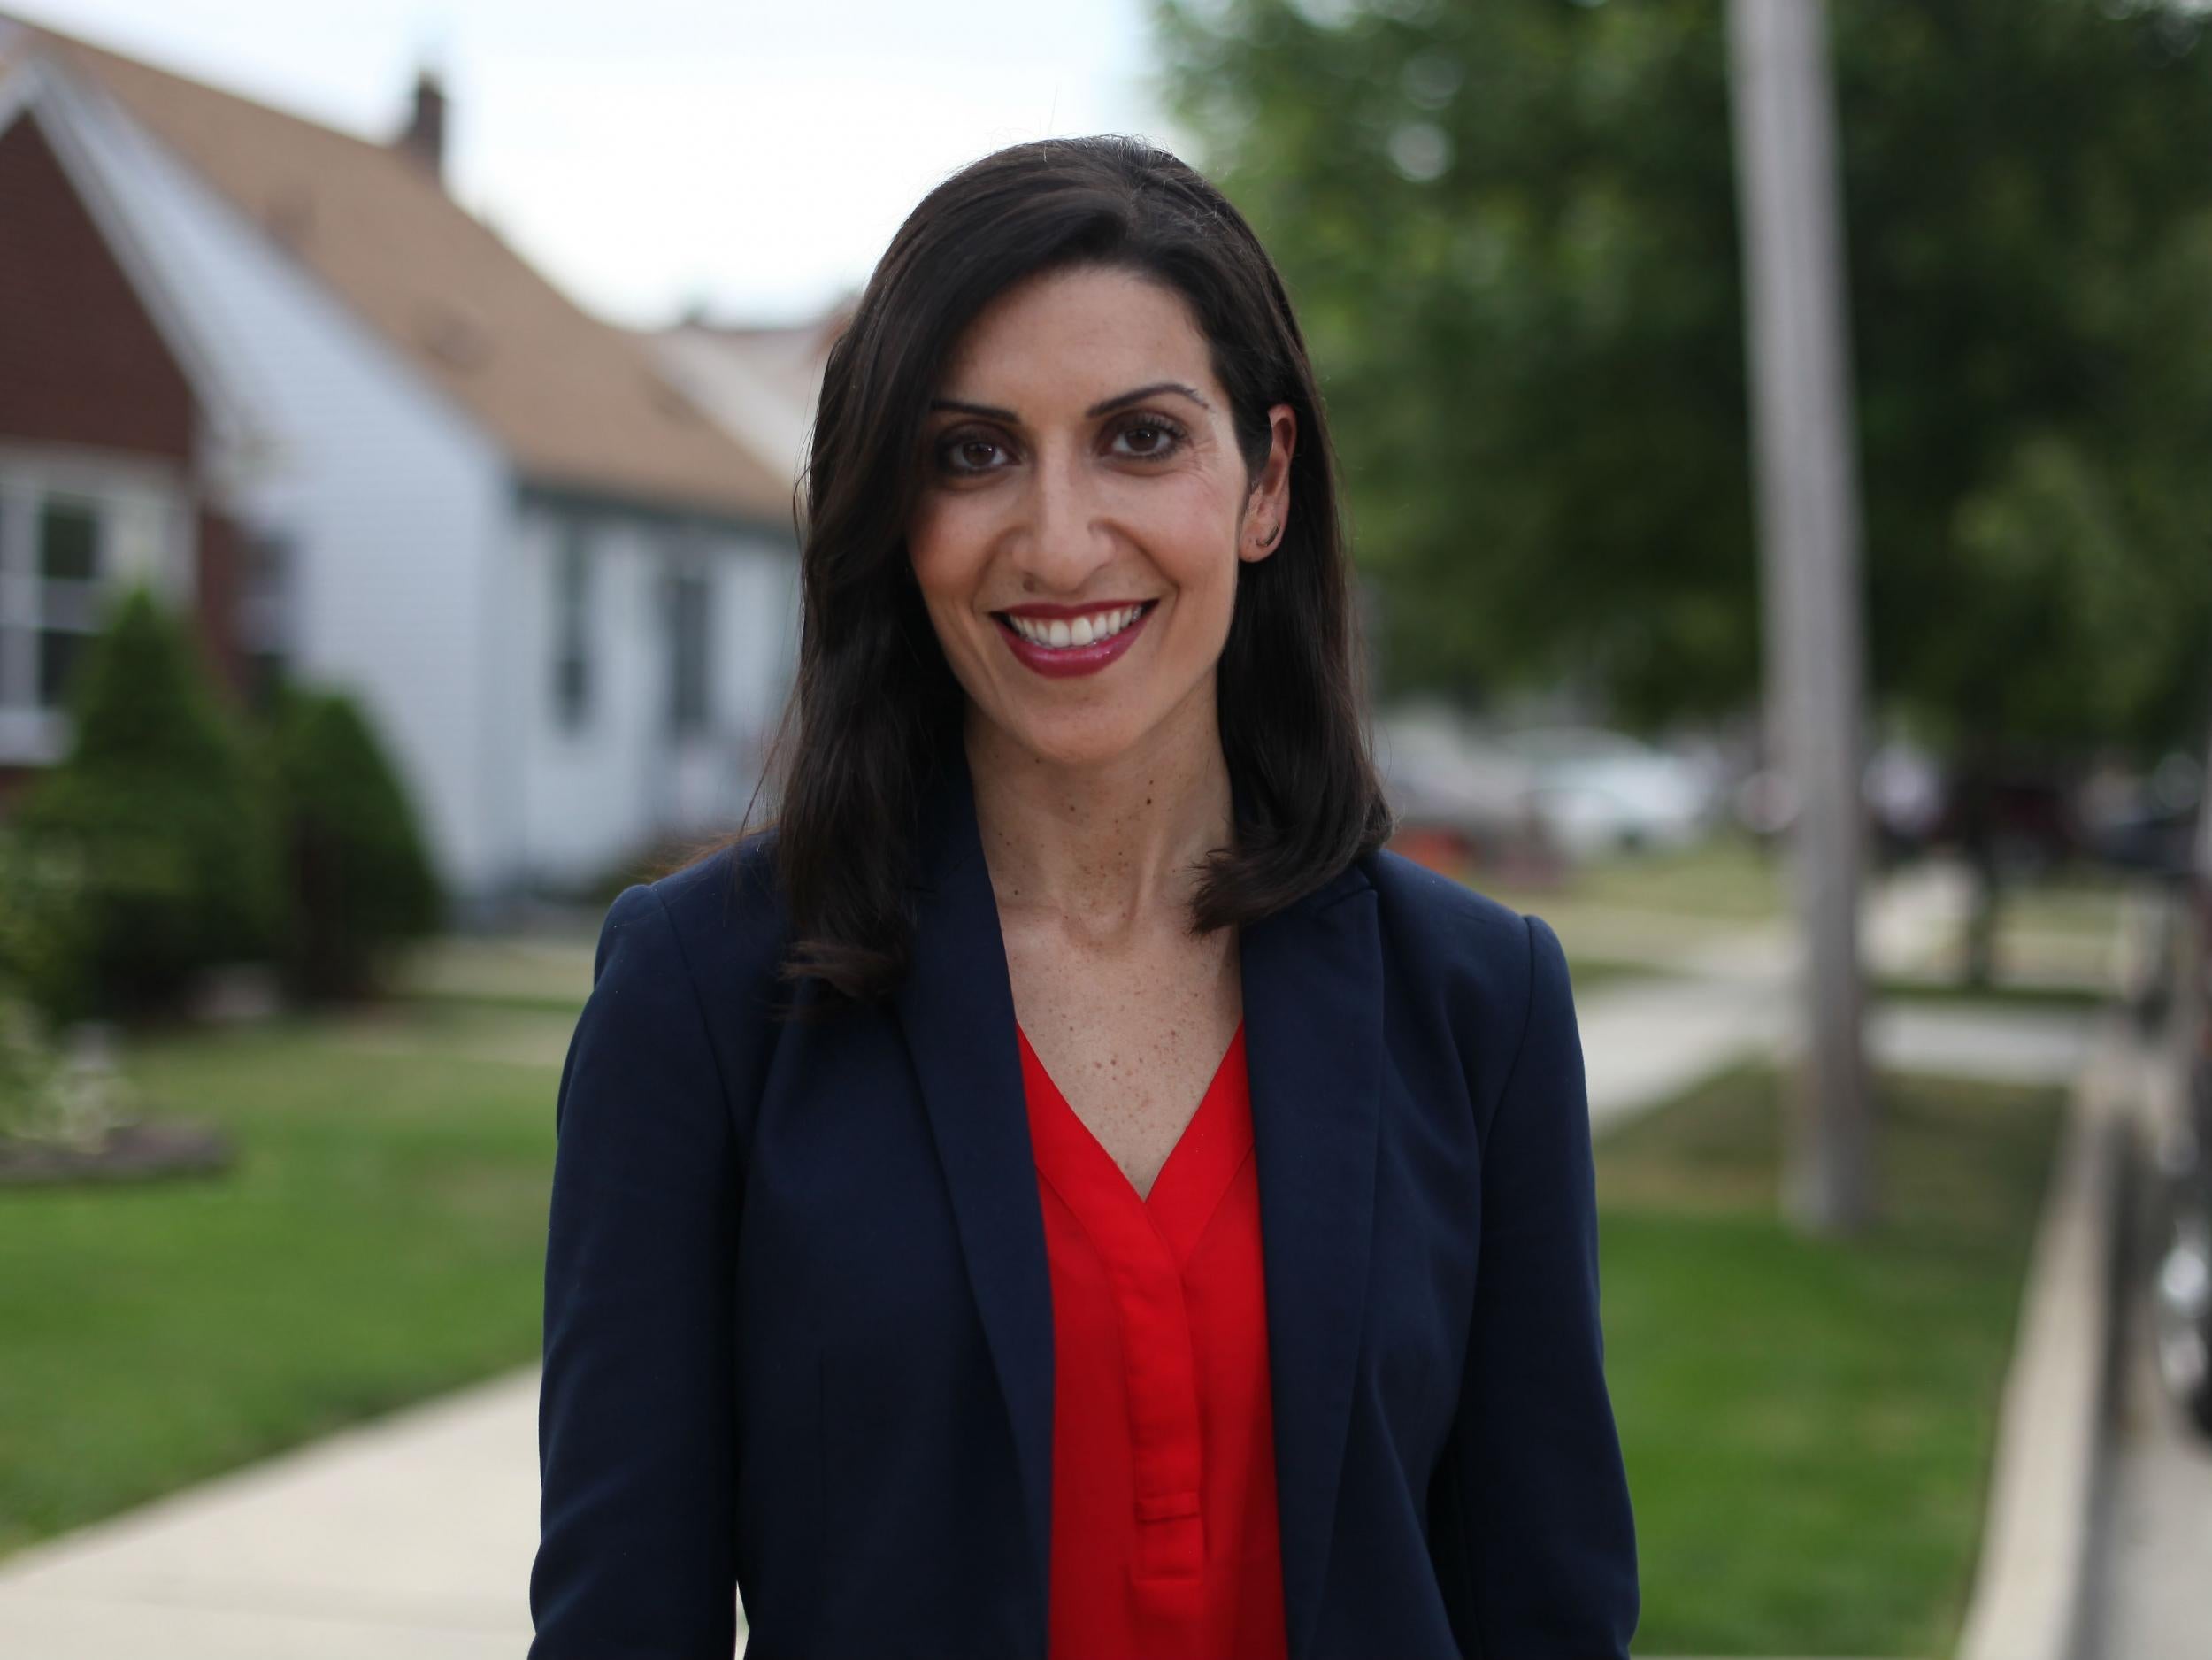 Ms Saad is running for Congress is Michigan's 11th district, which has been Republican (with one exception) since 1967